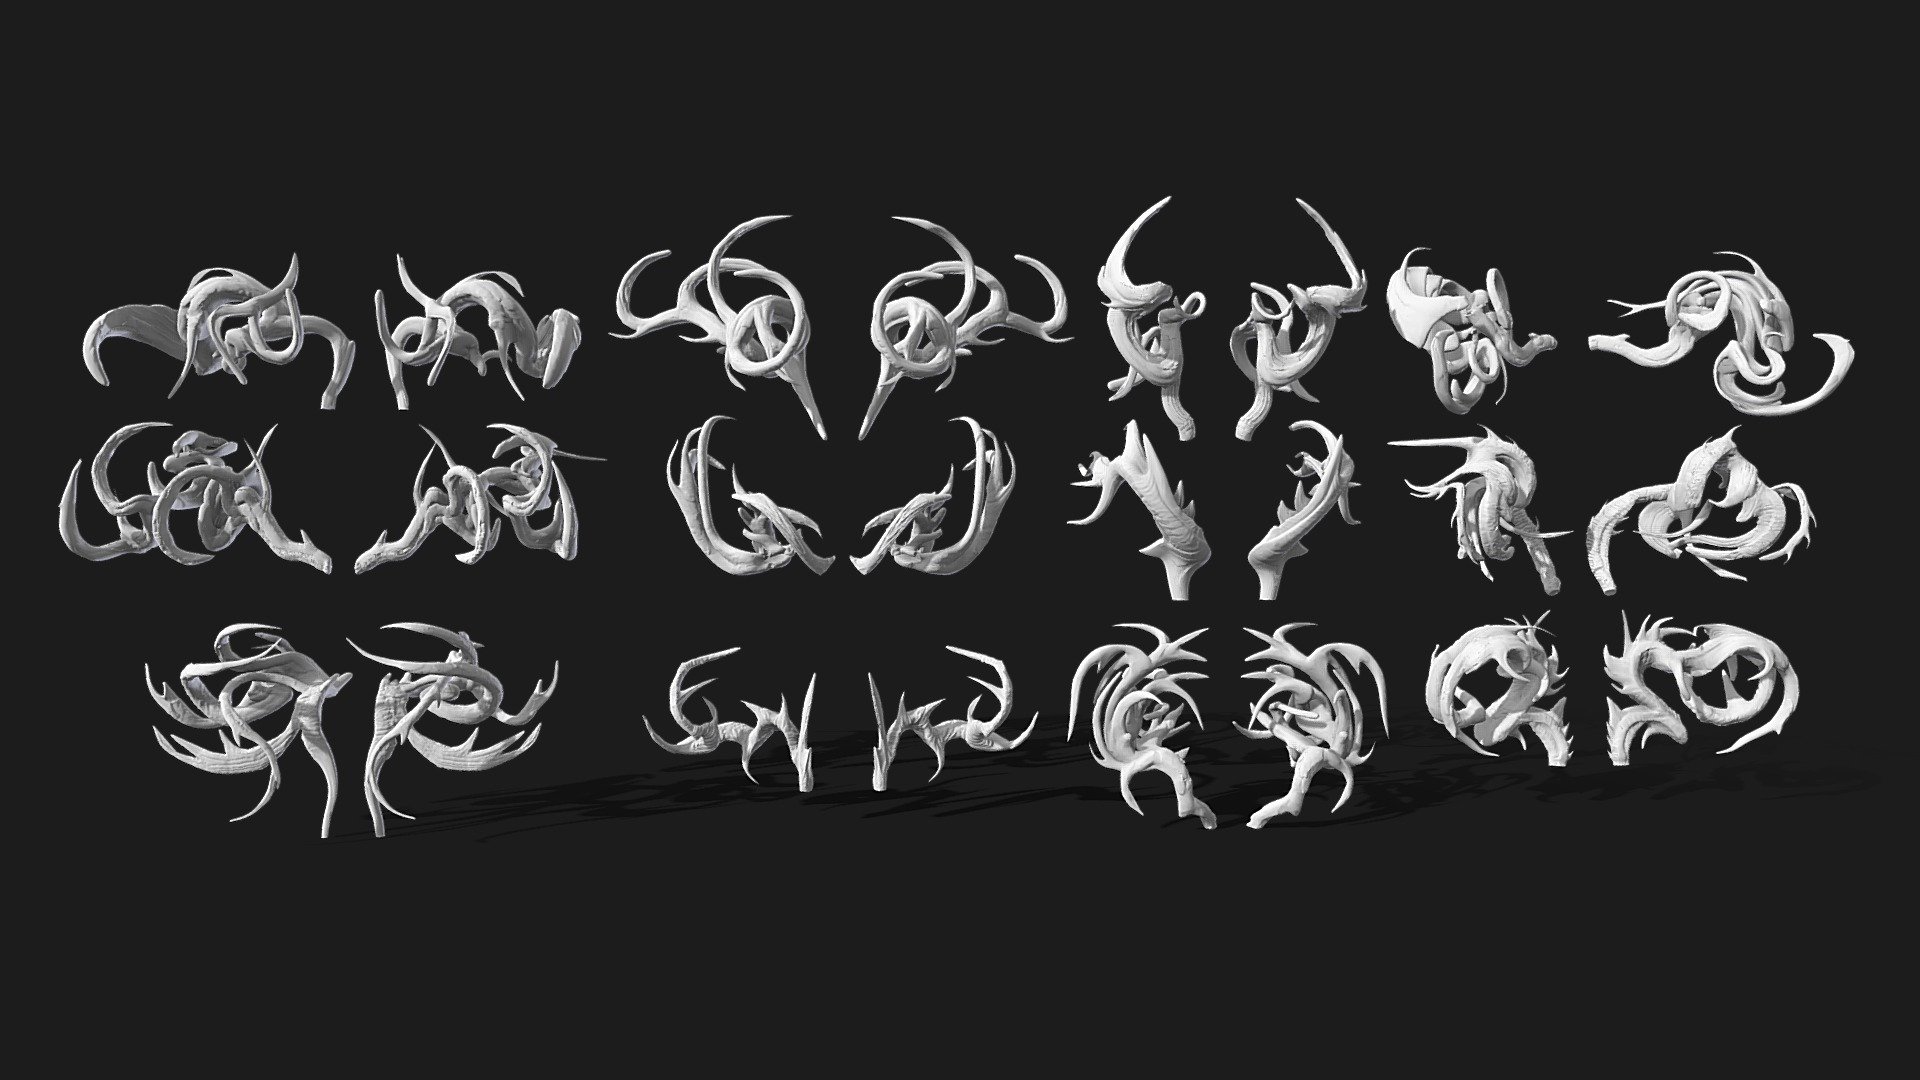 High resolution pack of 12 different horn meshes that you can use for your character! Fully detailed and decimated. FBX format.

Horn Pack 3: https://sketchfab.com/3d-models/horn-pack-3-5e46a616eebc4d549fbe01e79ff6cbb7 - Horn Pack 4 - Buy Royalty Free 3D model by Alexandria Maharaj (@Thedovahtamer) 3d model